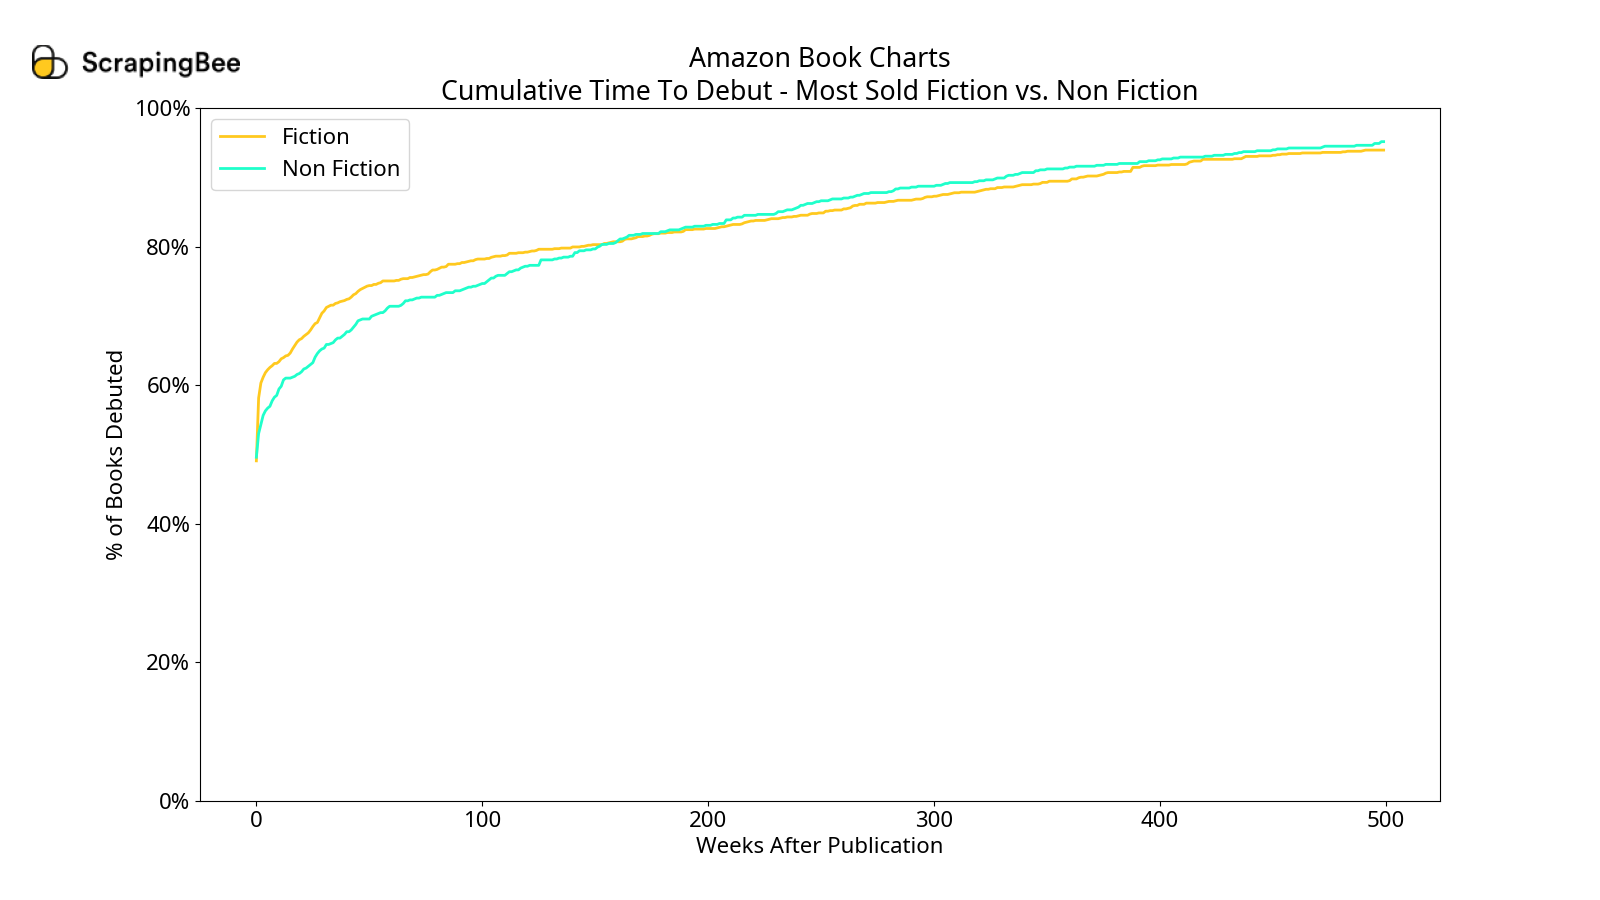 Time to Debut Most Sold Fiction vs. Non Fiction